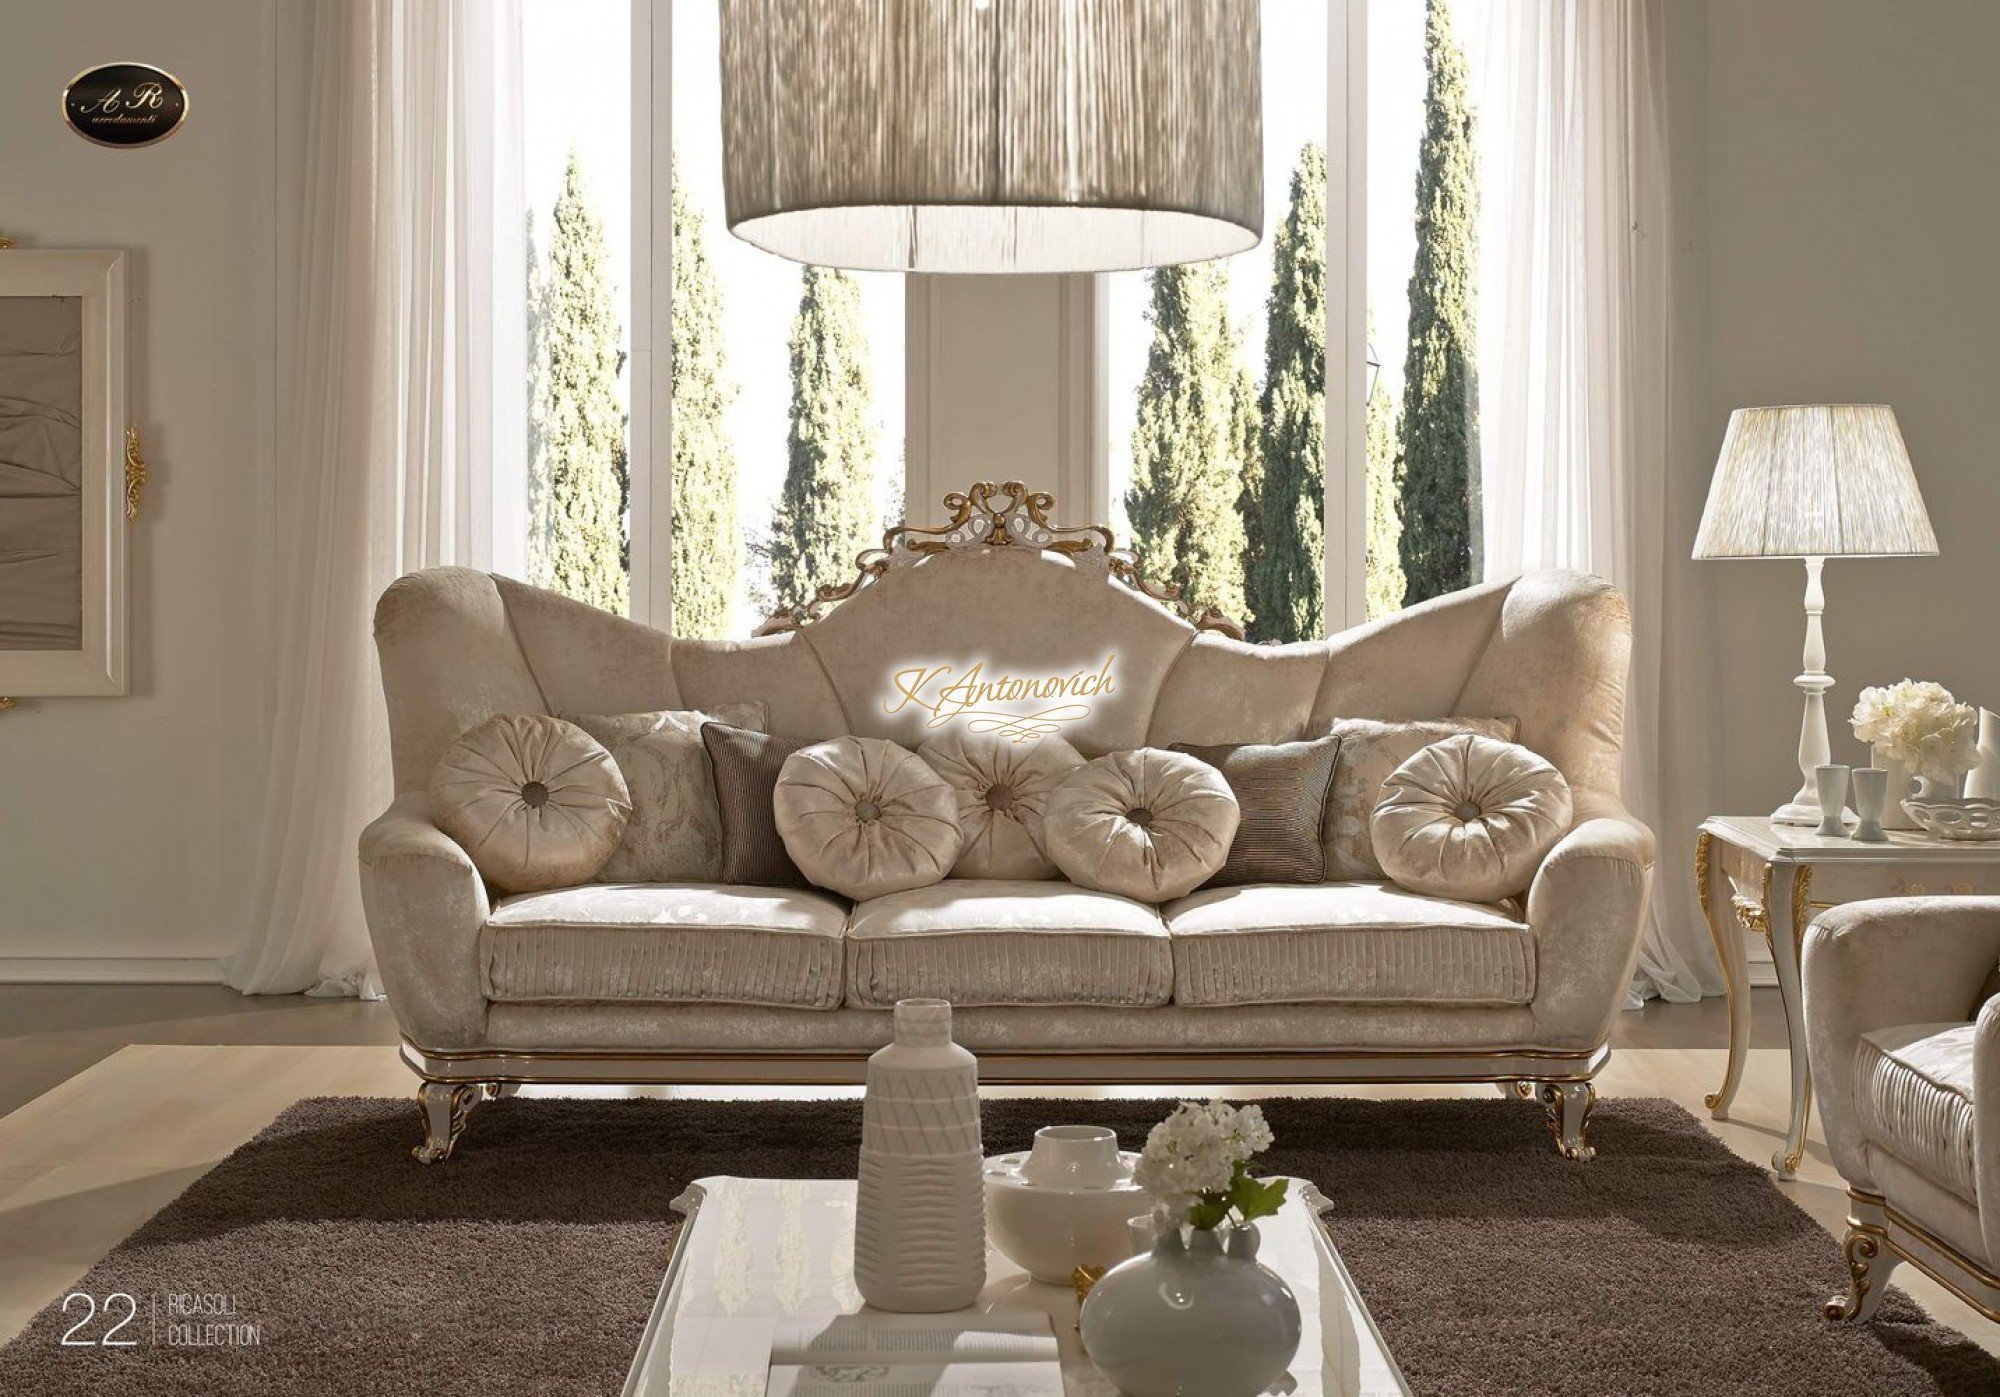 Living room furniture in the Italian style